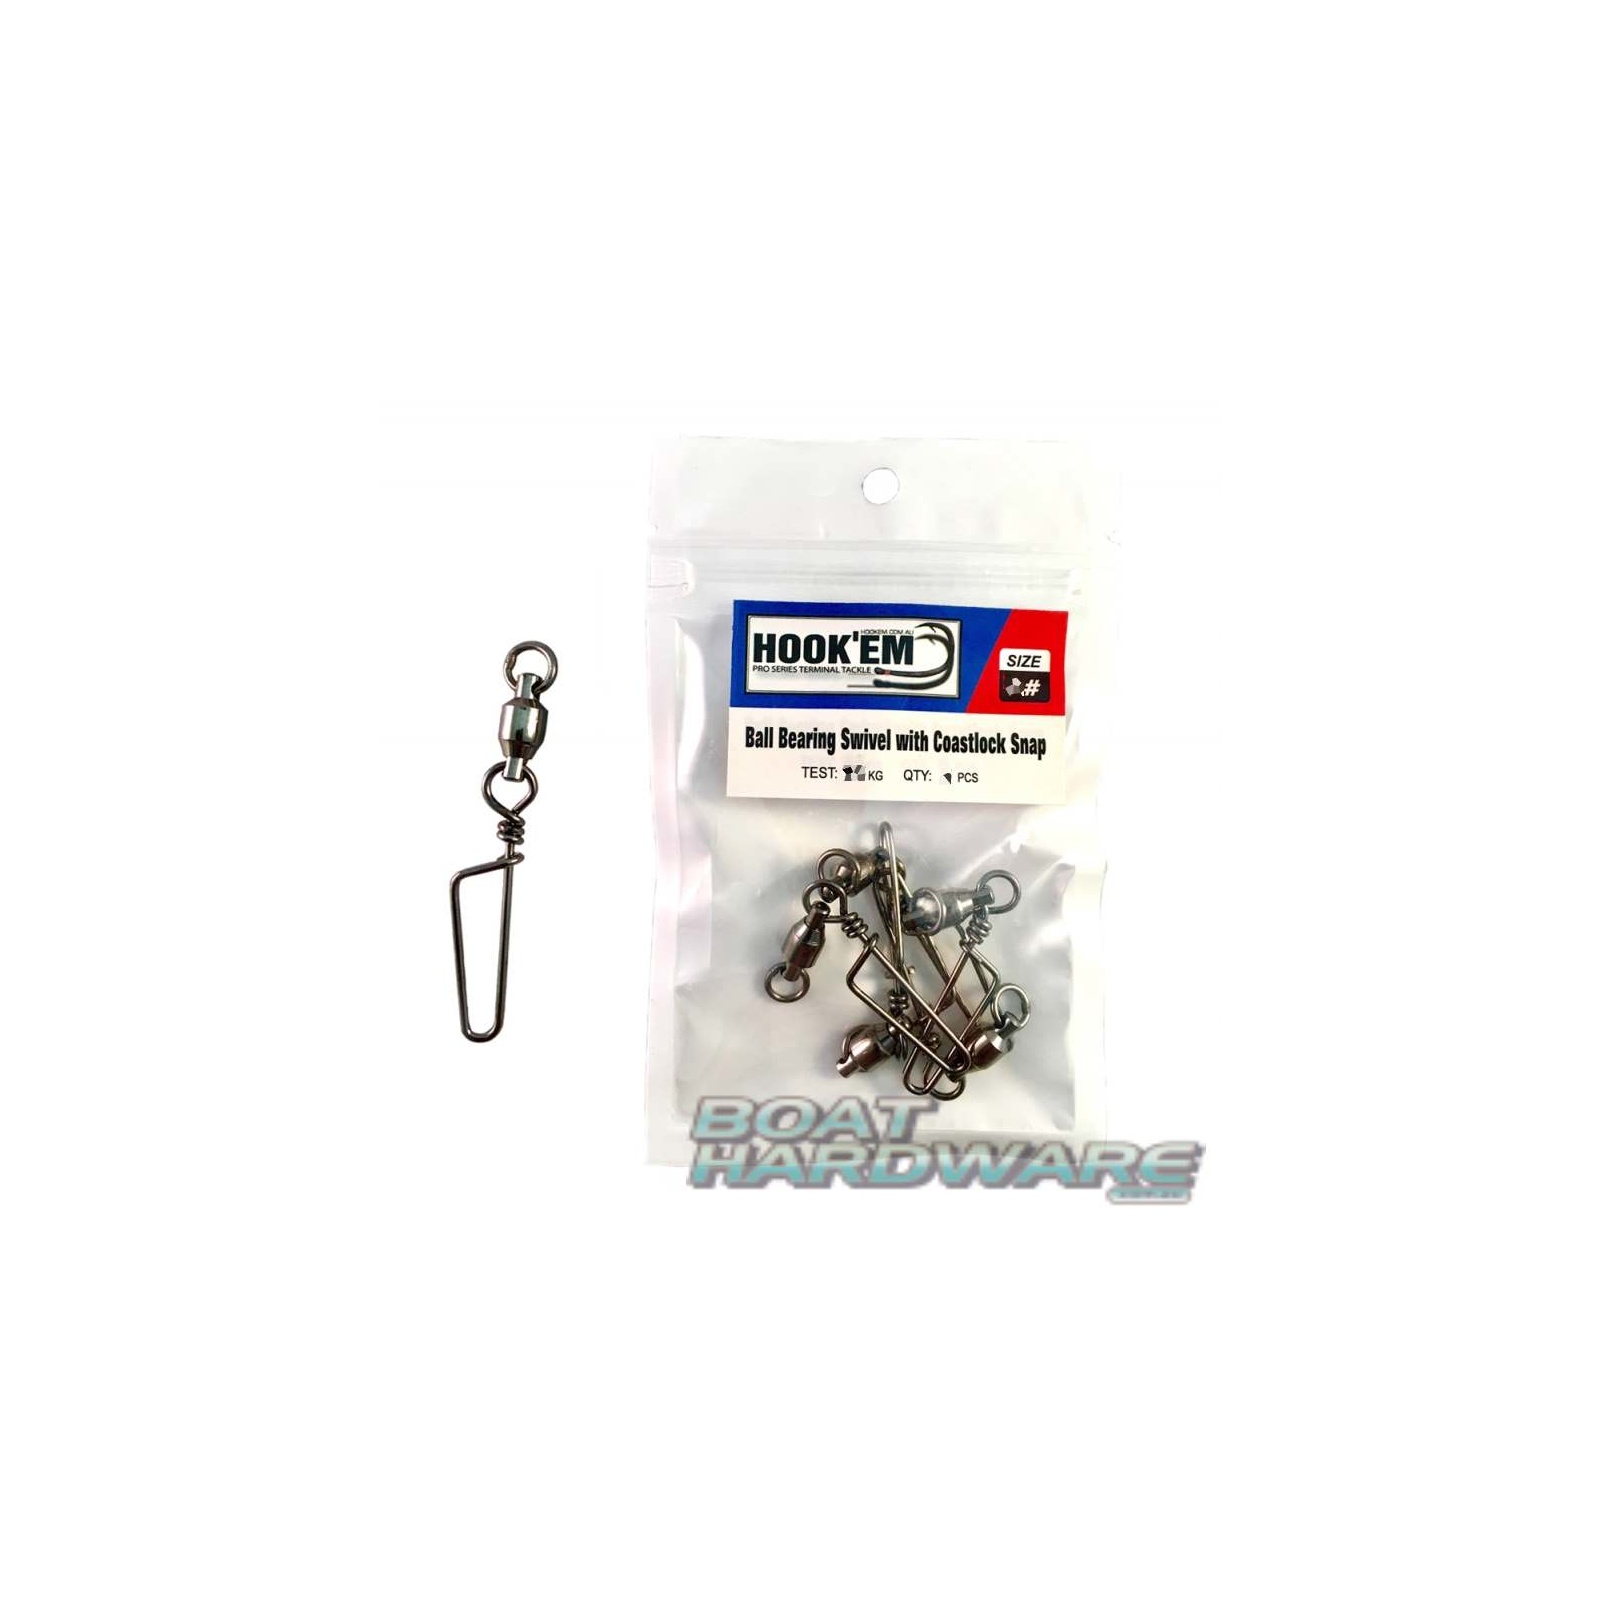 Size 7 Ball Bearing Swivel with Coastlock Snap (Pack of 6)